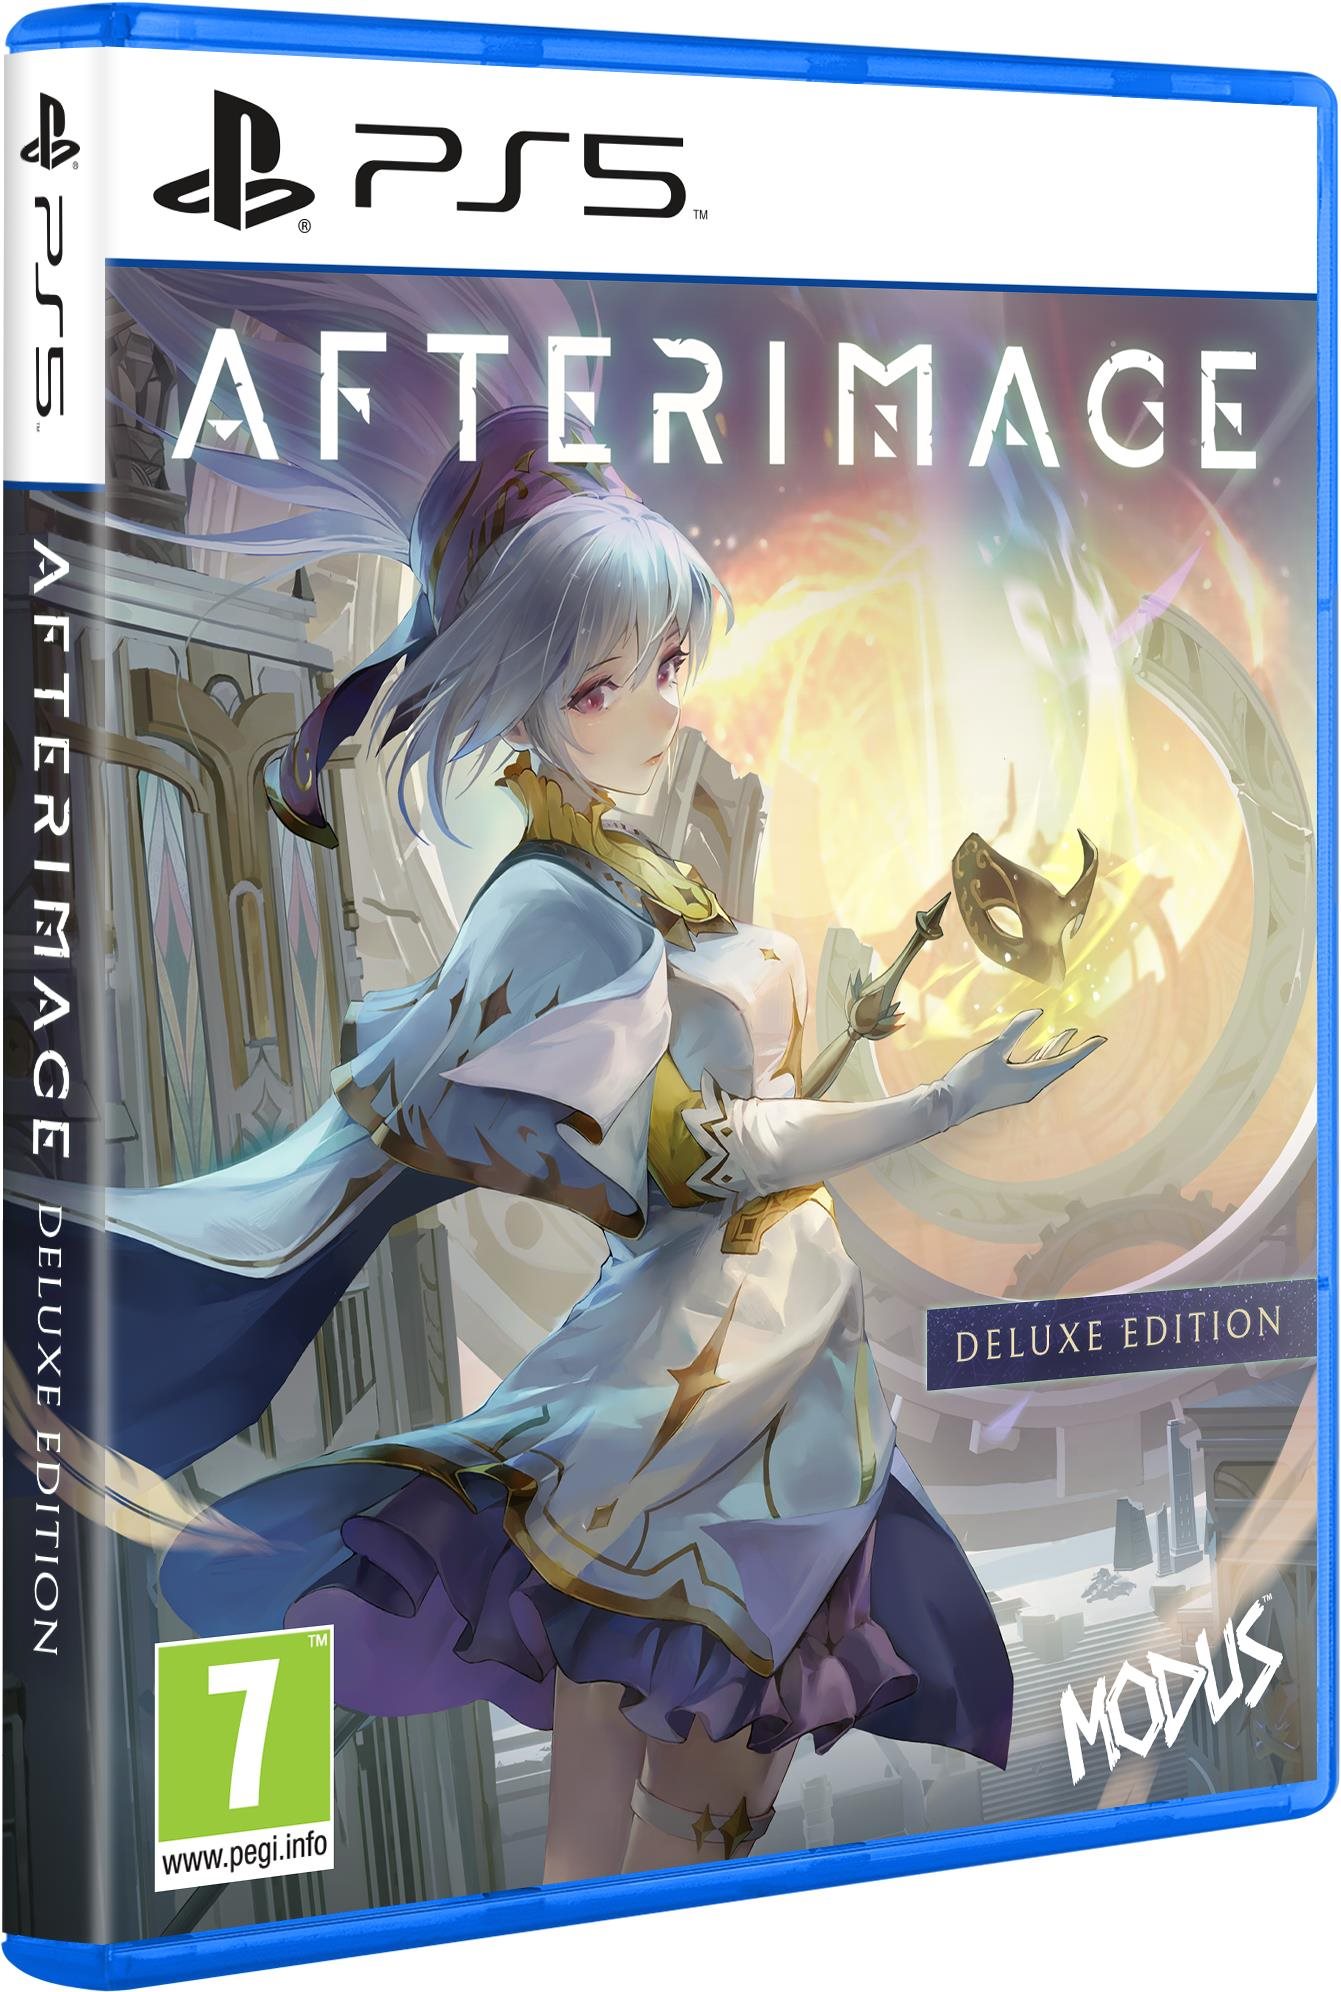 Afterimage: Deluxe Edition - PS5